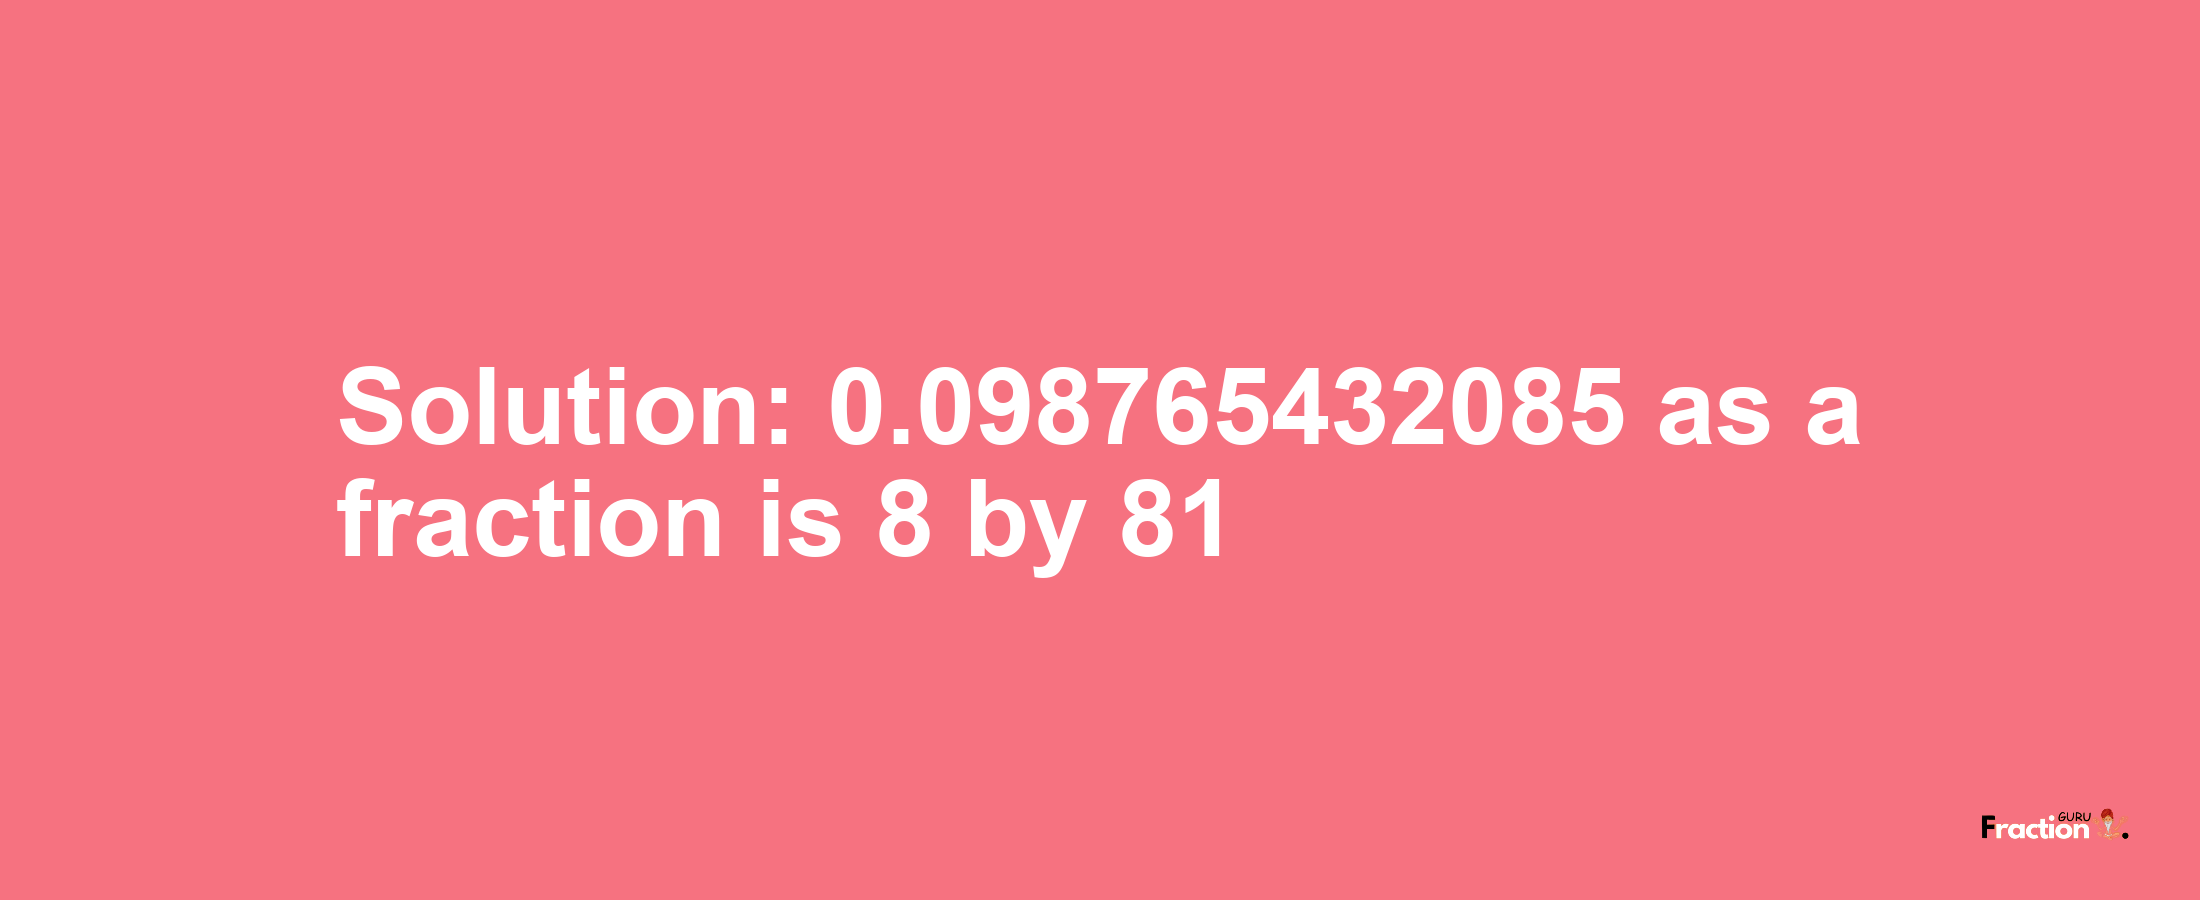 Solution:0.098765432085 as a fraction is 8/81